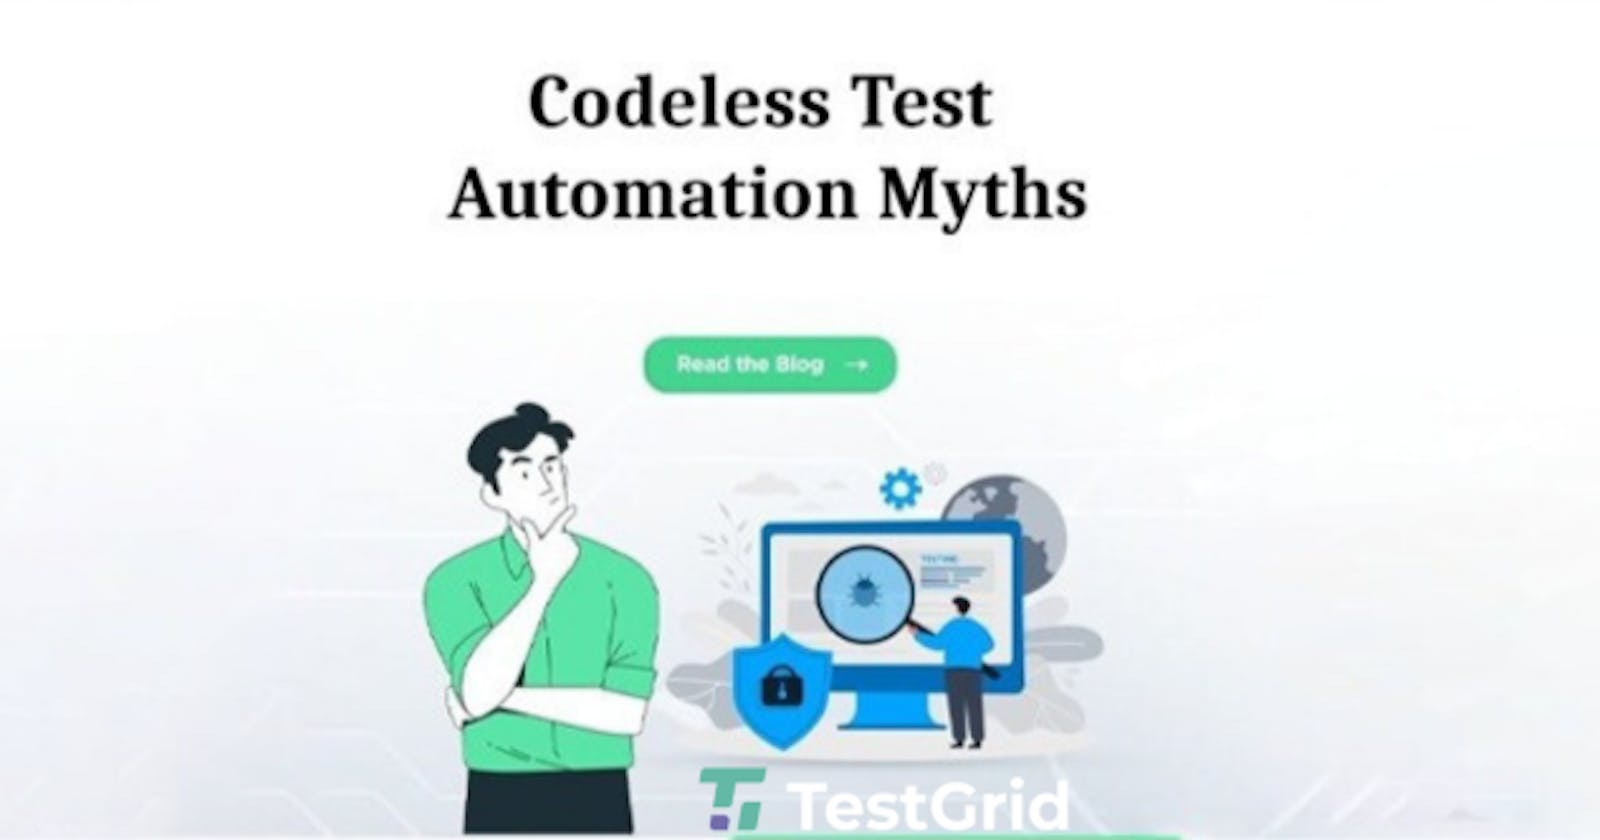 Know the Myths About Codeless Test Automation and their Truths